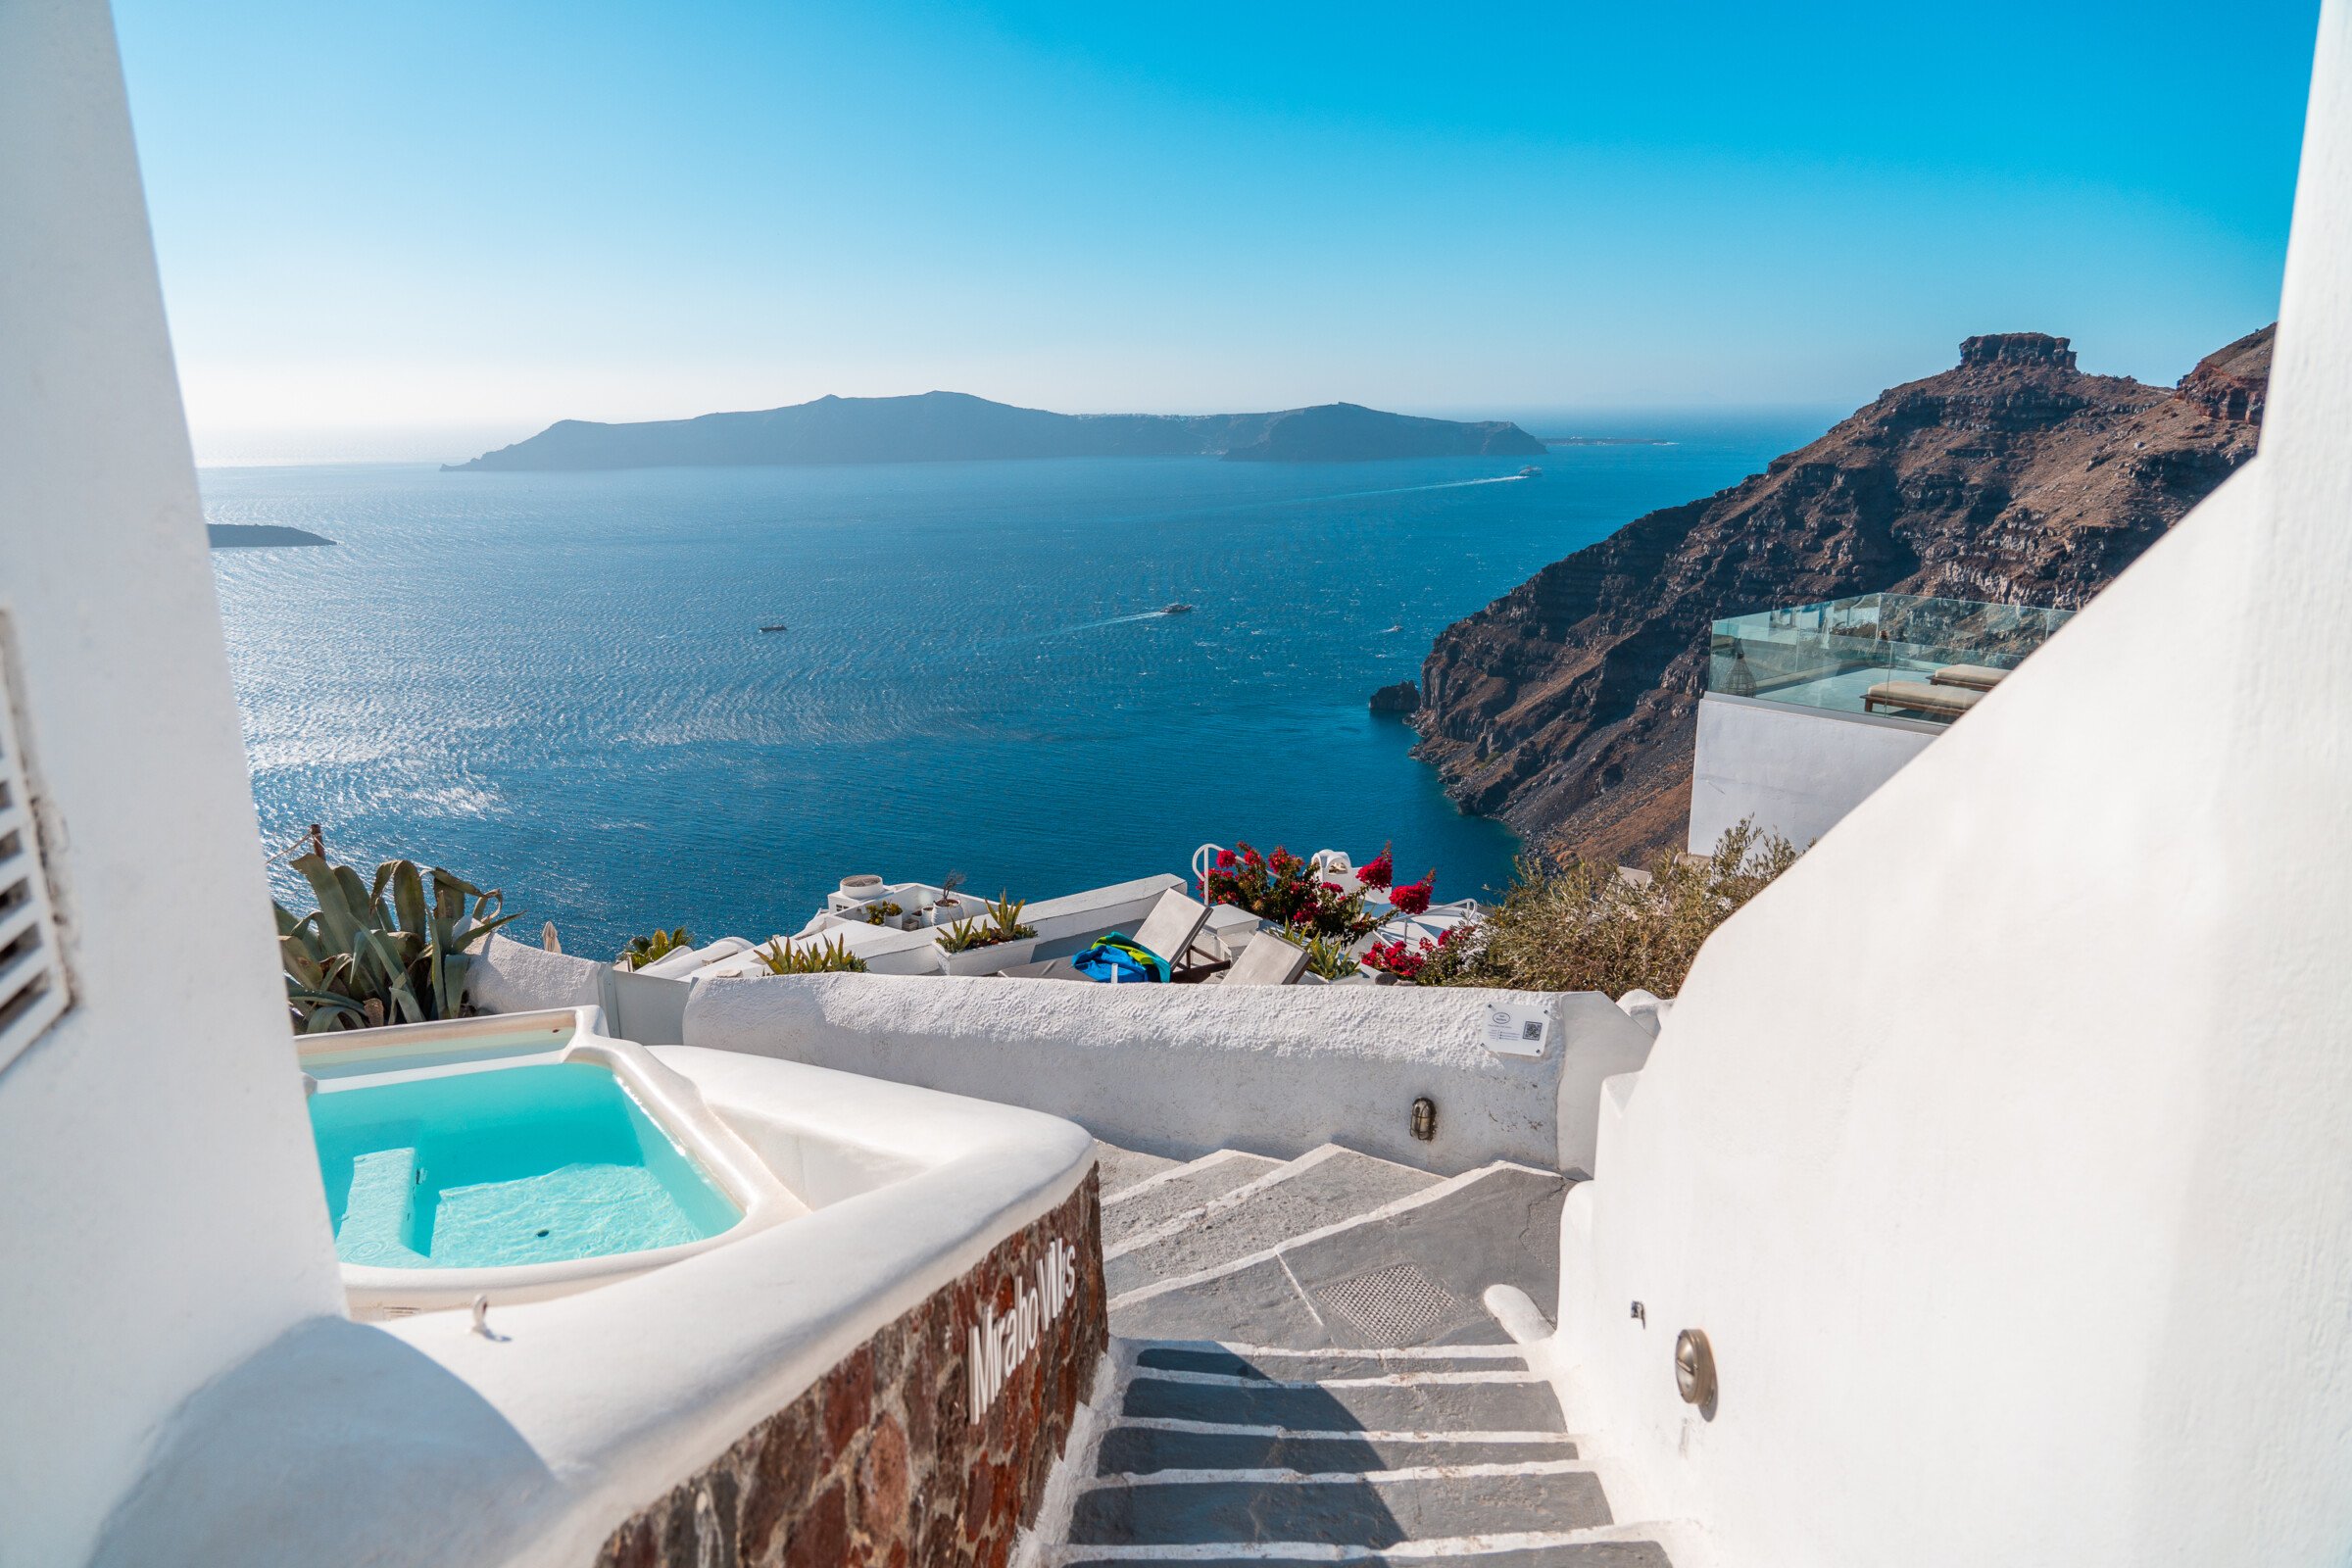 This image shows whitewashed stairs and a small pool in Santorini. The iconic Skaros Rock is in the background. 